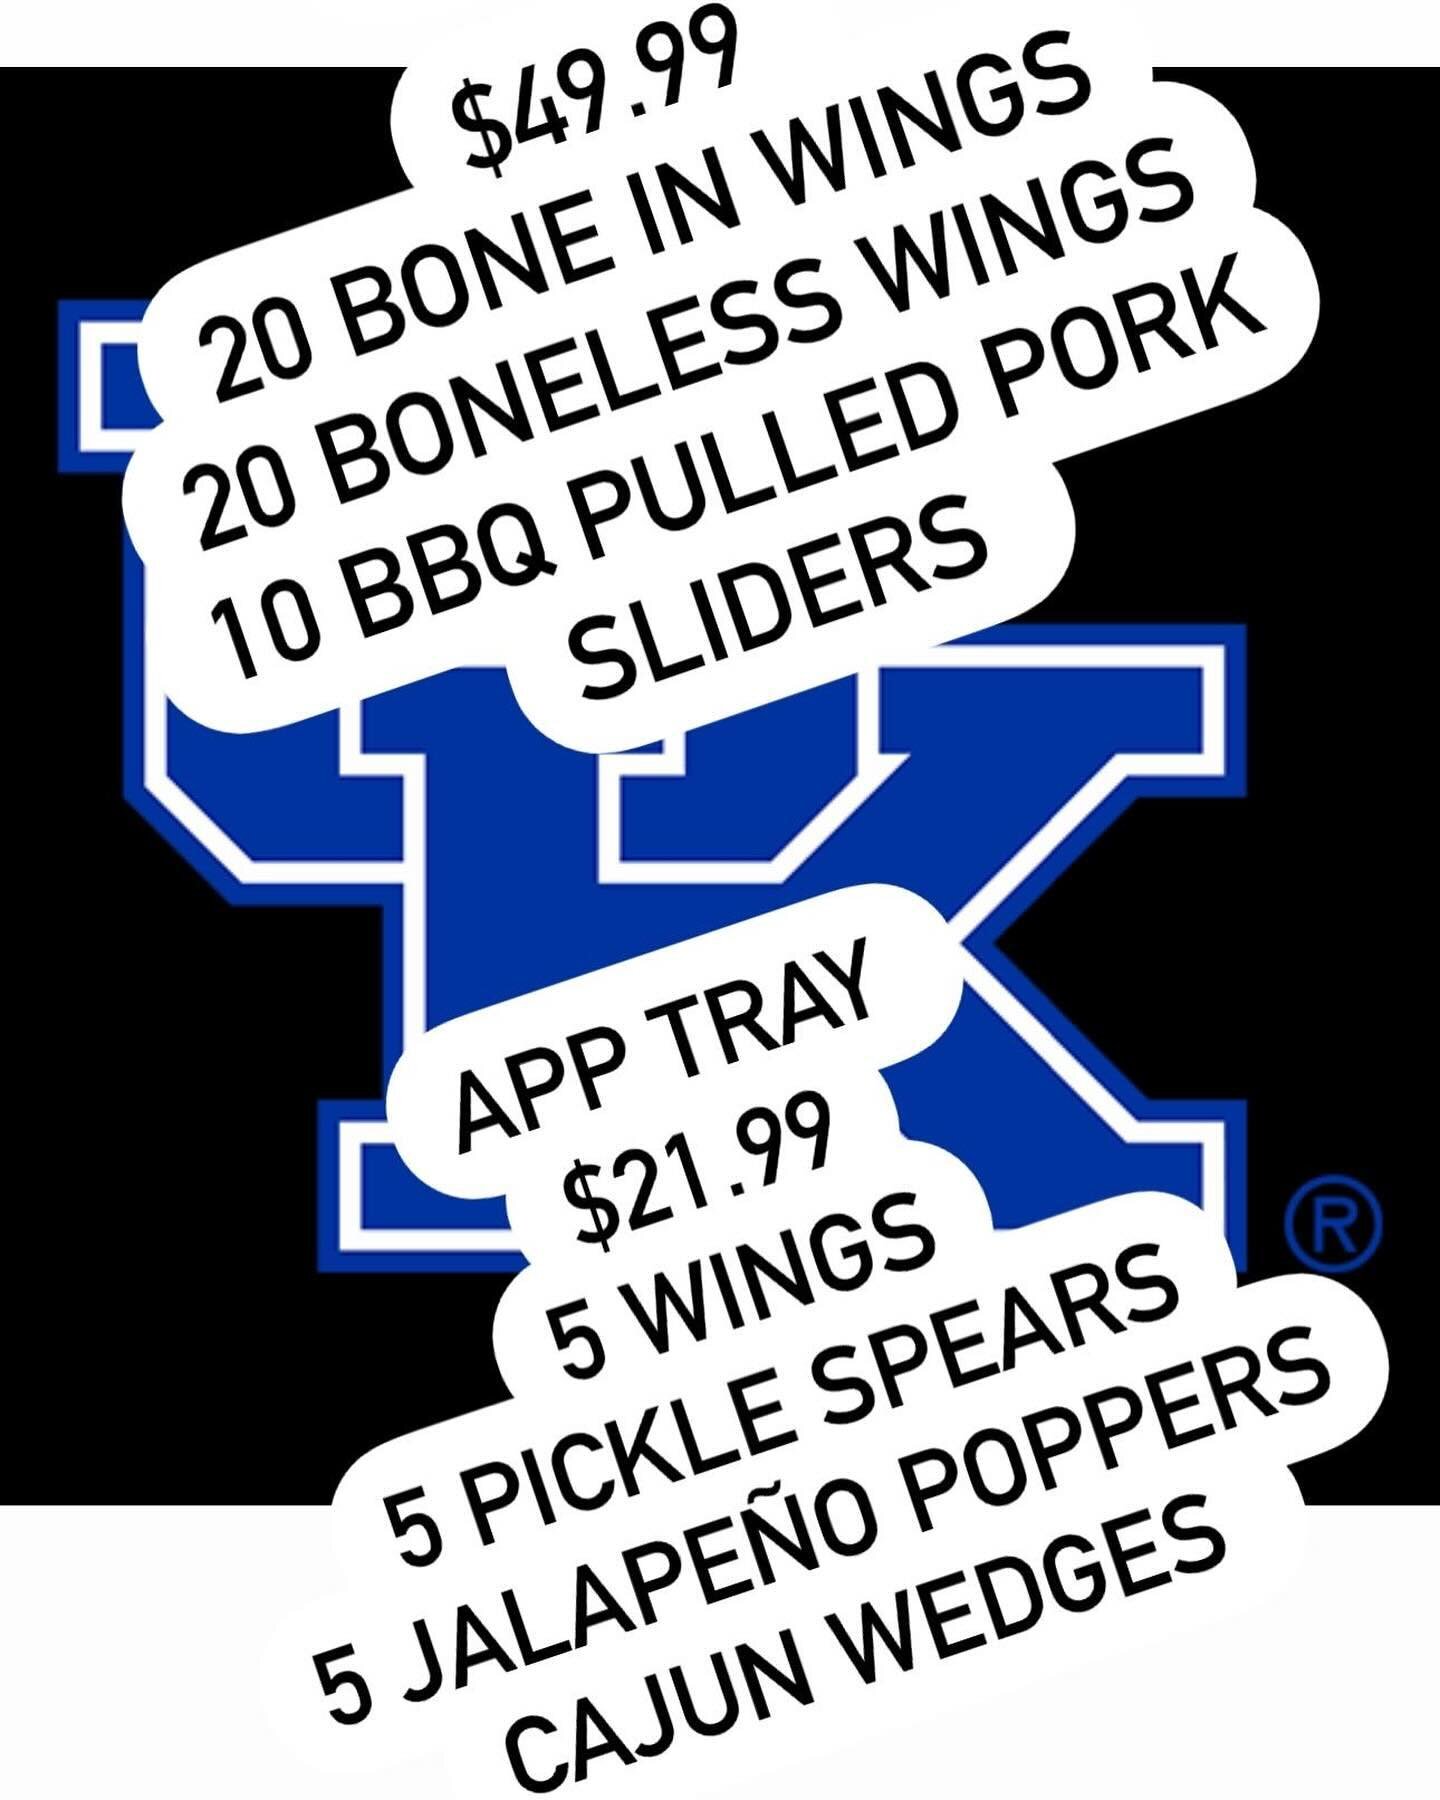 New game day trays and app trays. Only available on UK game days. Perfect finger food to enjoy the game to.